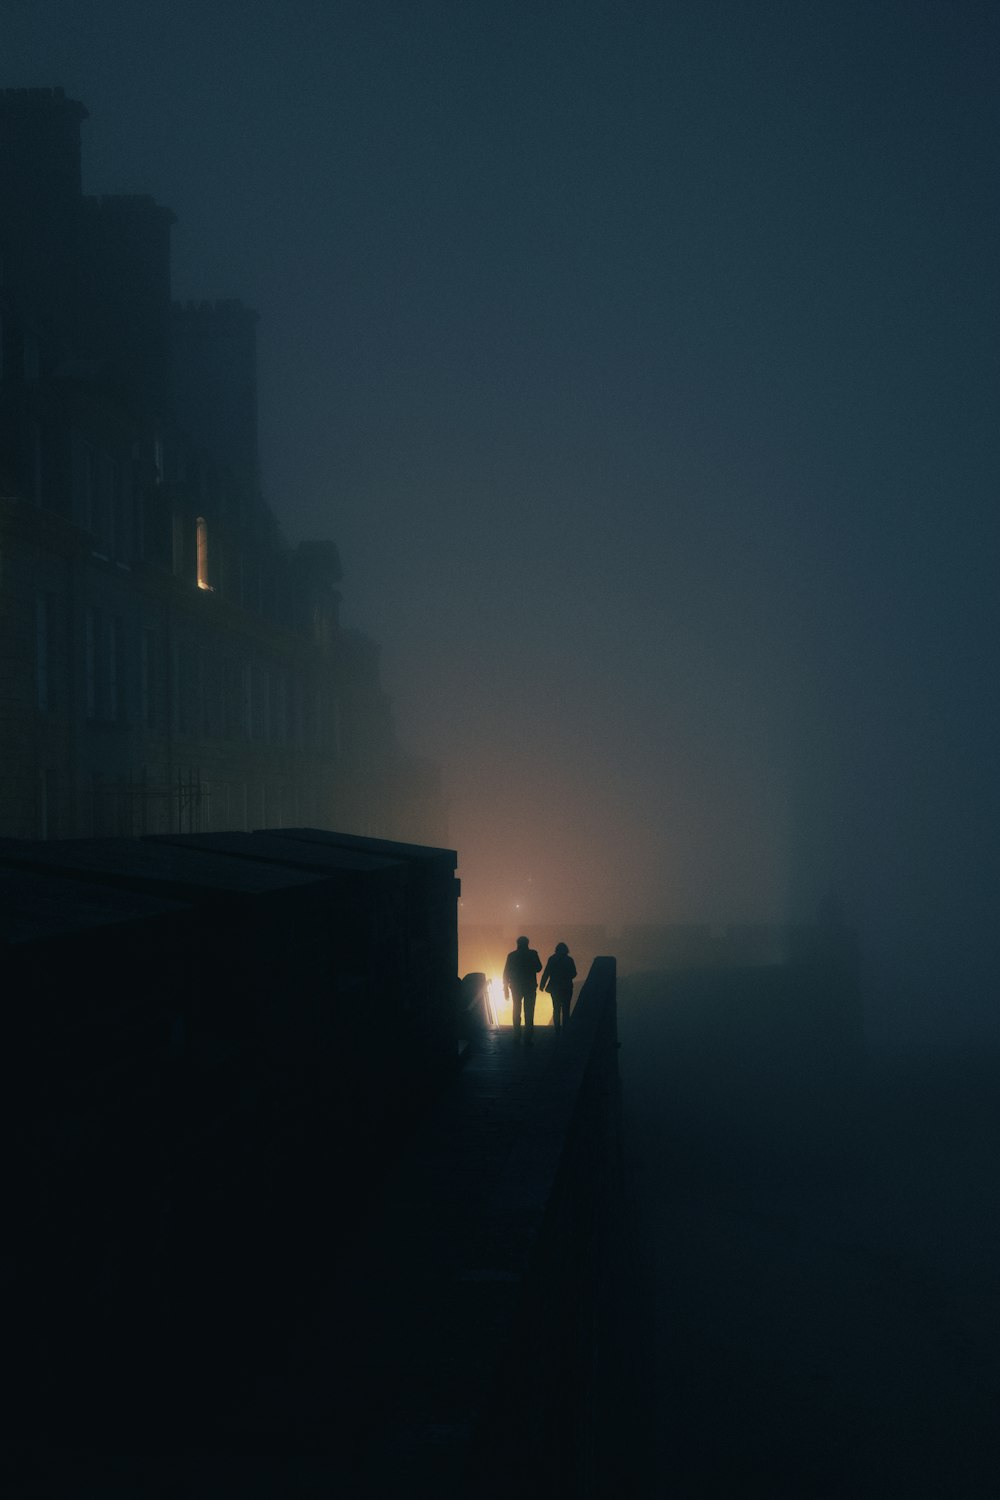 a couple of people walking down a foggy street